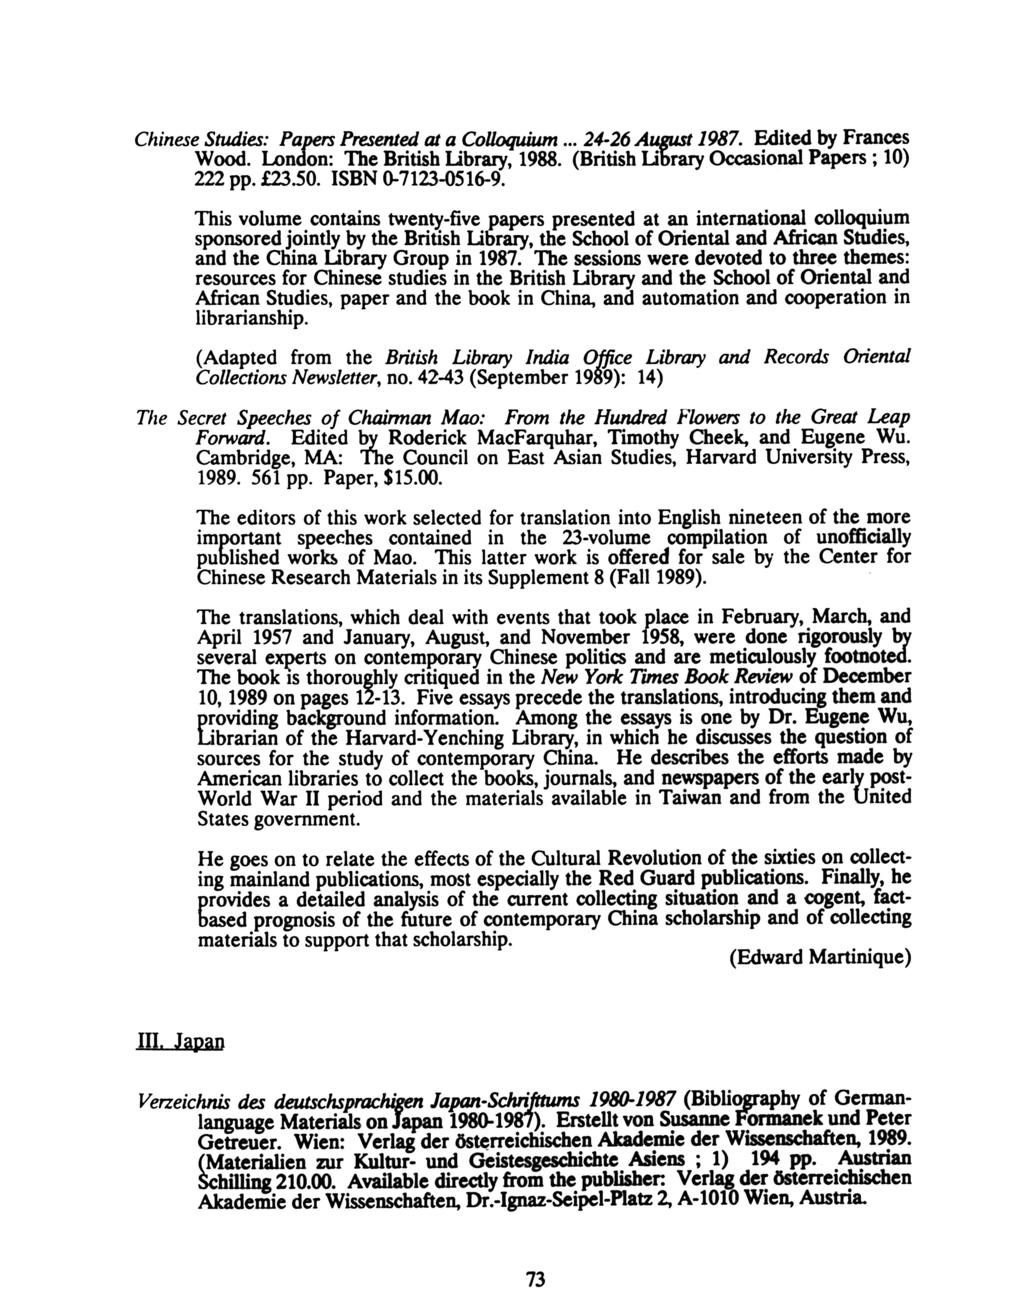 Chinese Studies: Papers Presented at a Colloquium... 24-26 August 1987. Edited by Frances Wood. London: The British Library, 1988. (British Library Occasional Papers ; 10) 222 pp. 23.50.